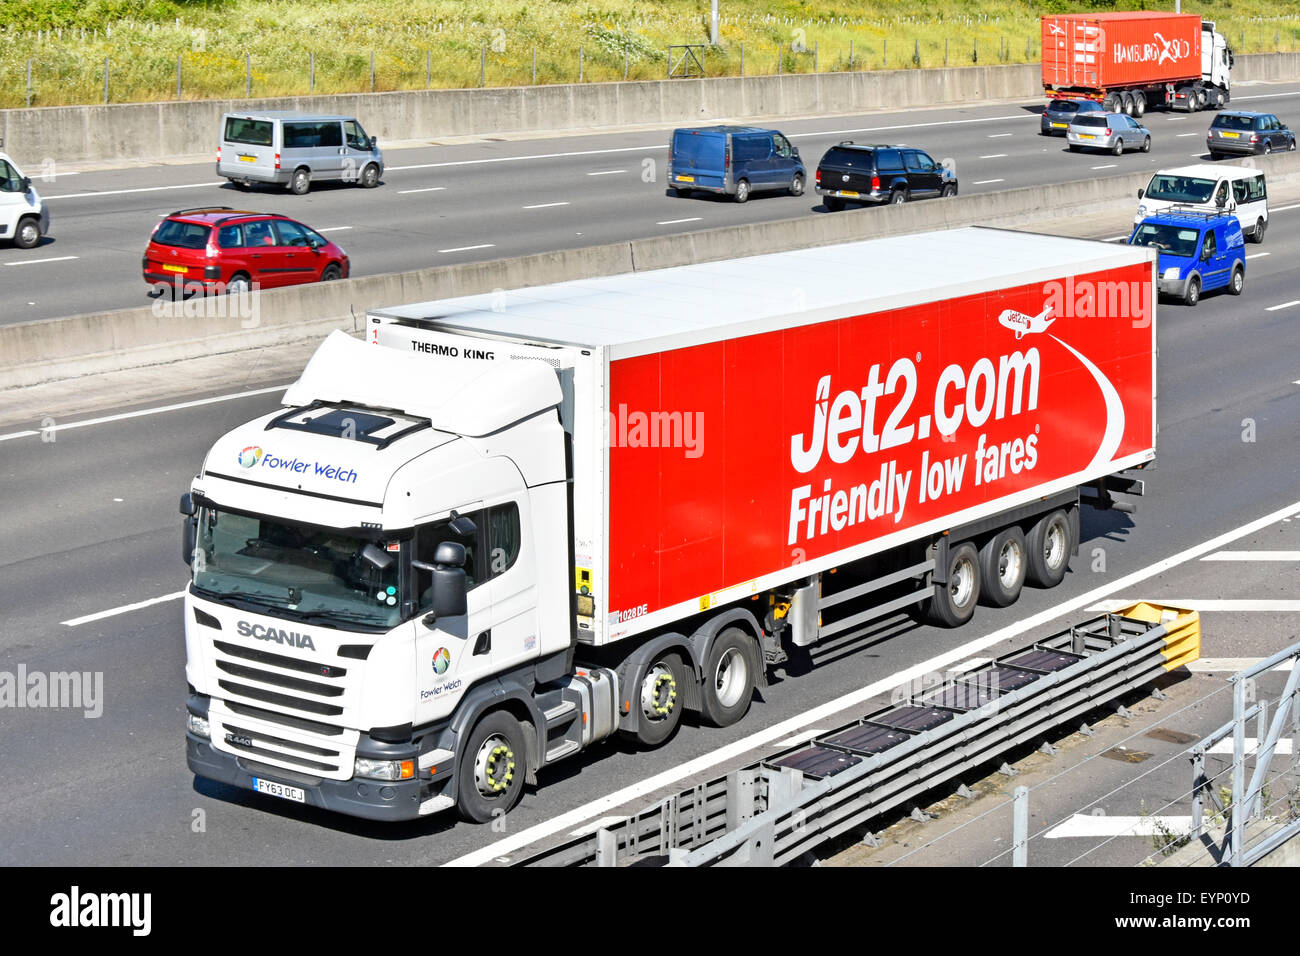 Jet2.com low cost airline advertising on articulated trailer and Fowler Welch Scania lorry truck driving along UK motorway Essex England Stock Photo